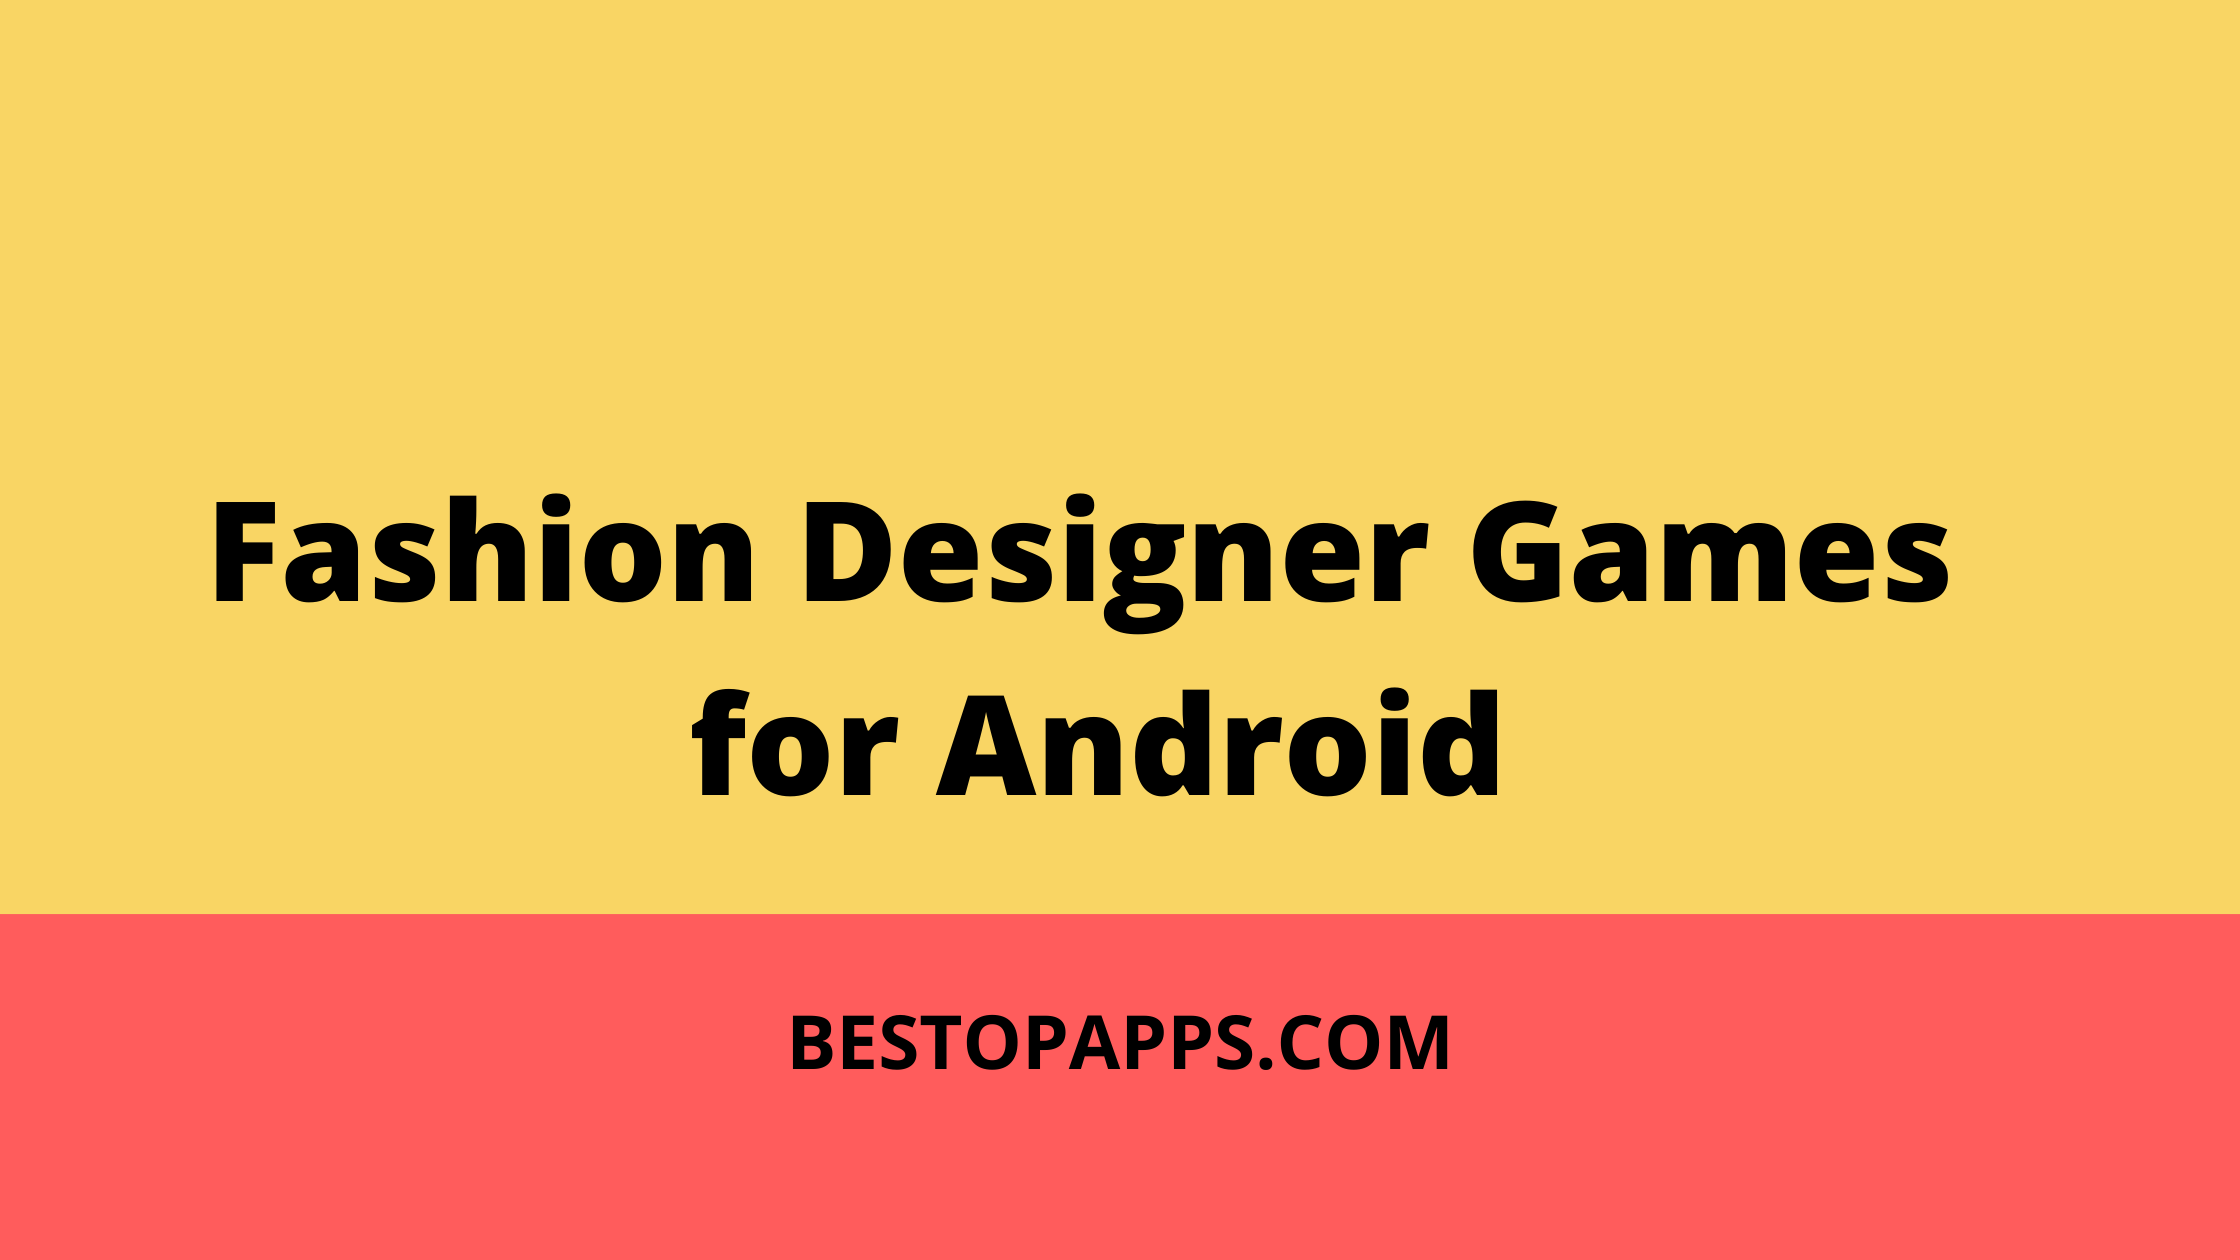 Fashion Designer Games for Android